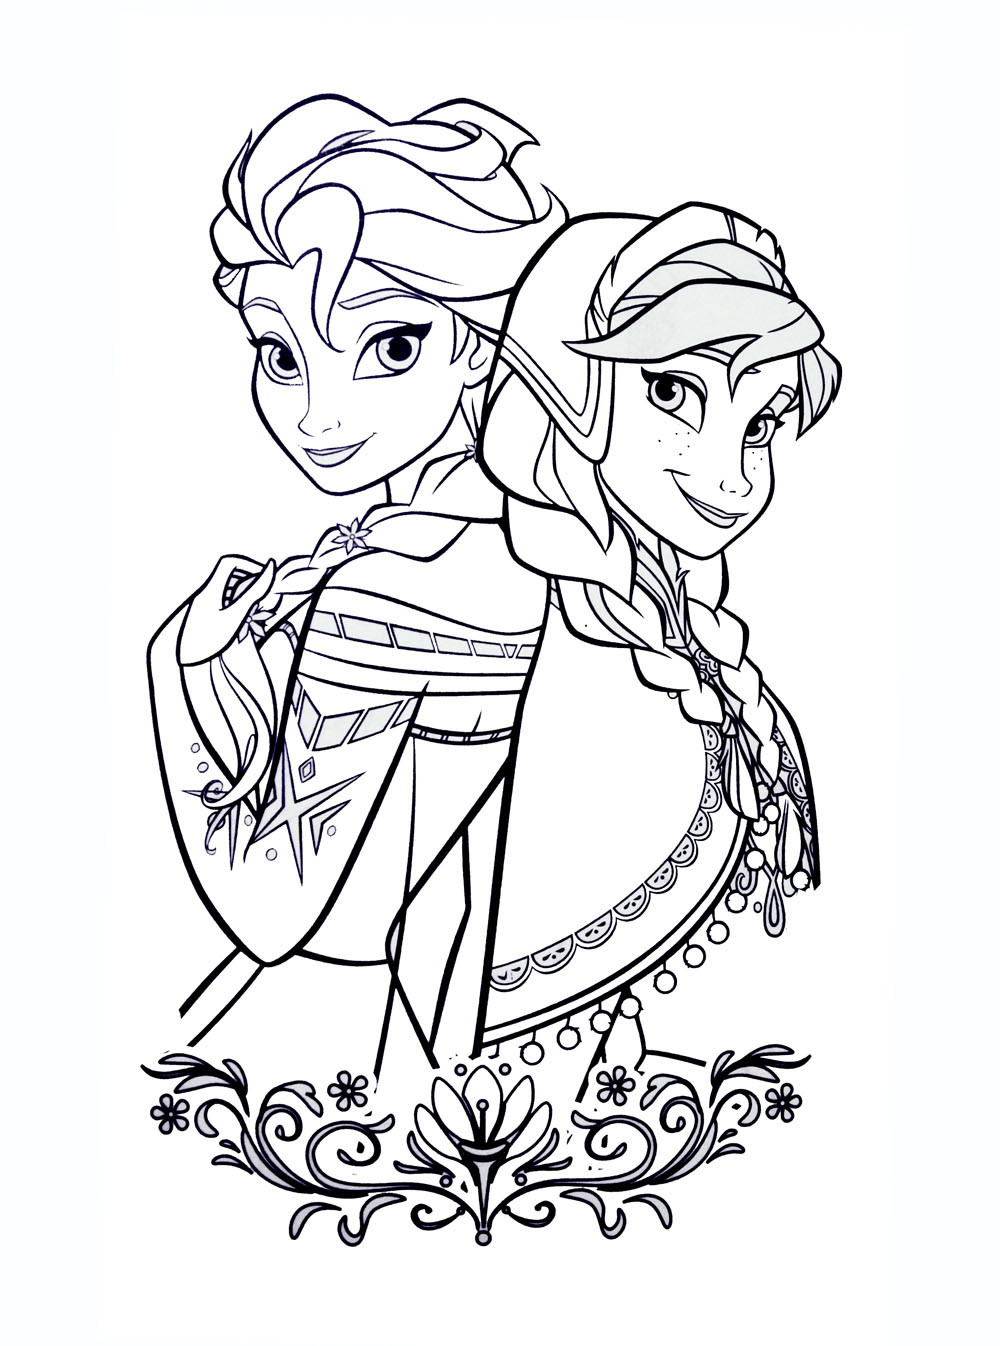 Kids Coloring Pages Frozen
 Frozen free to color for kids Frozen Kids Coloring Pages